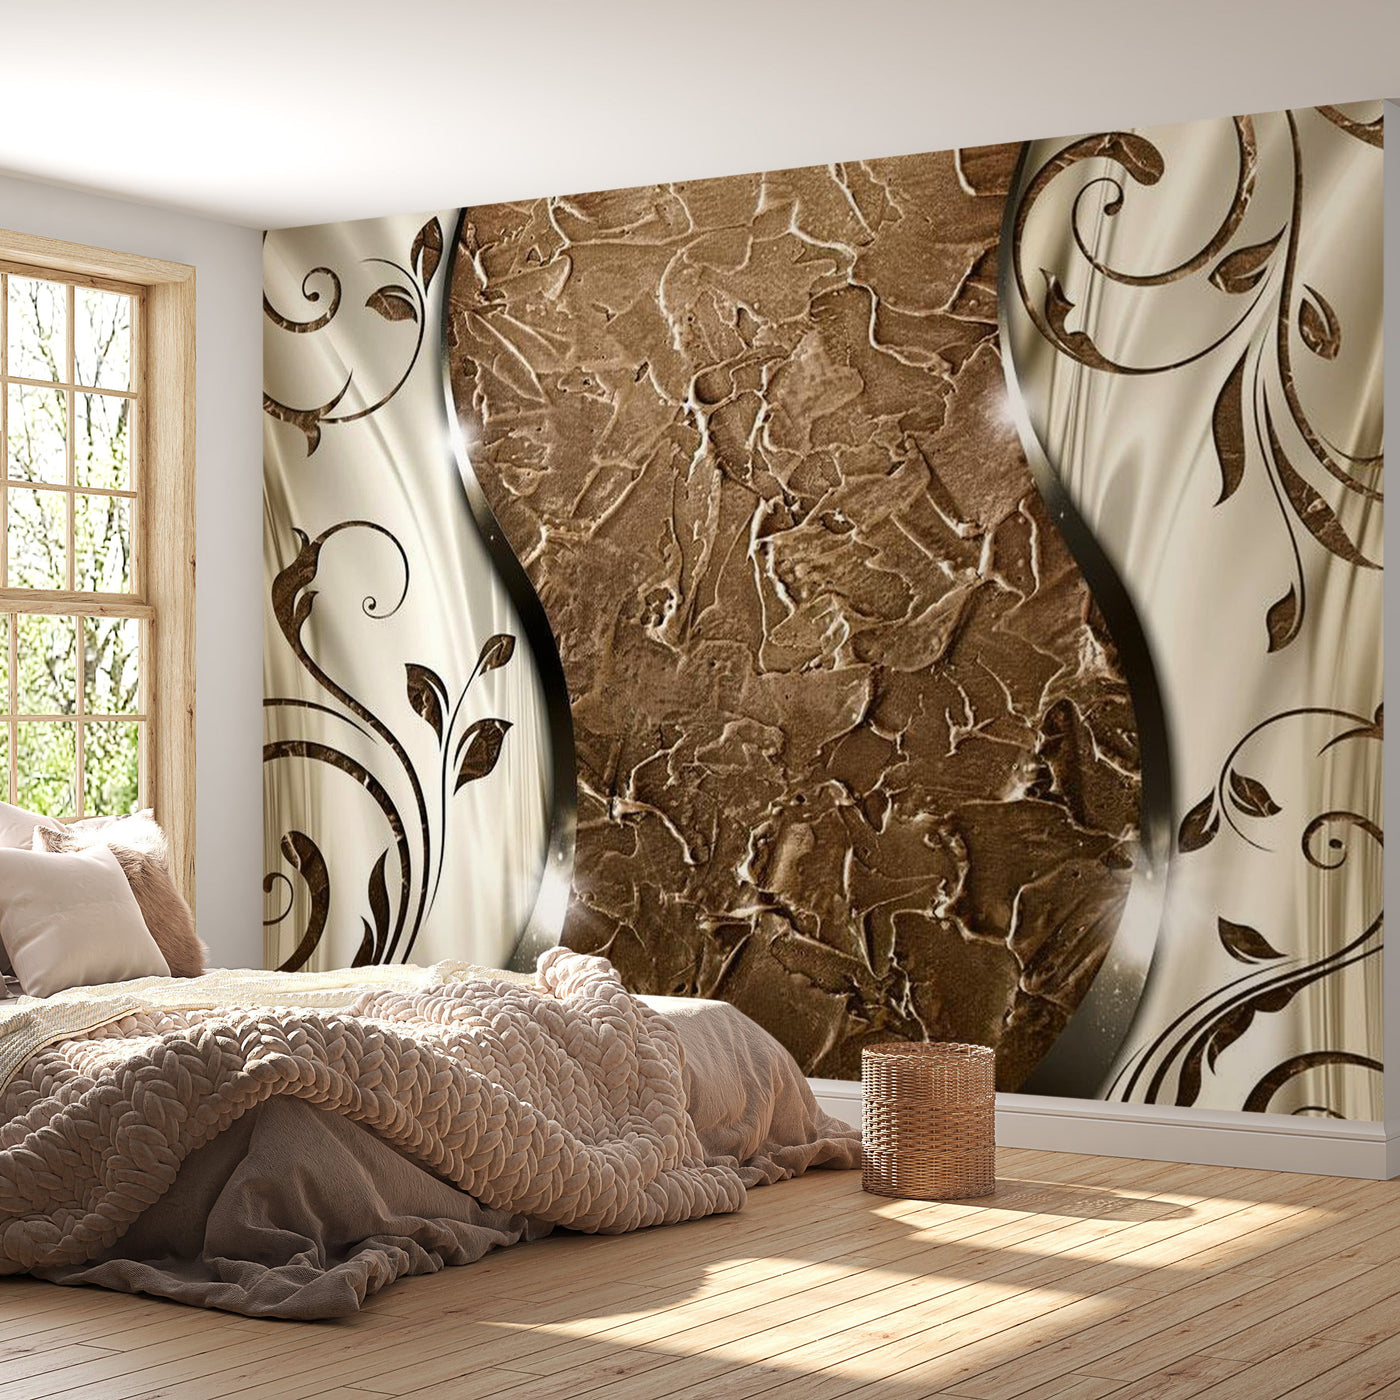 Peel & Stick Glam Wall Mural - Brown Twigs - Removable Wall Decals